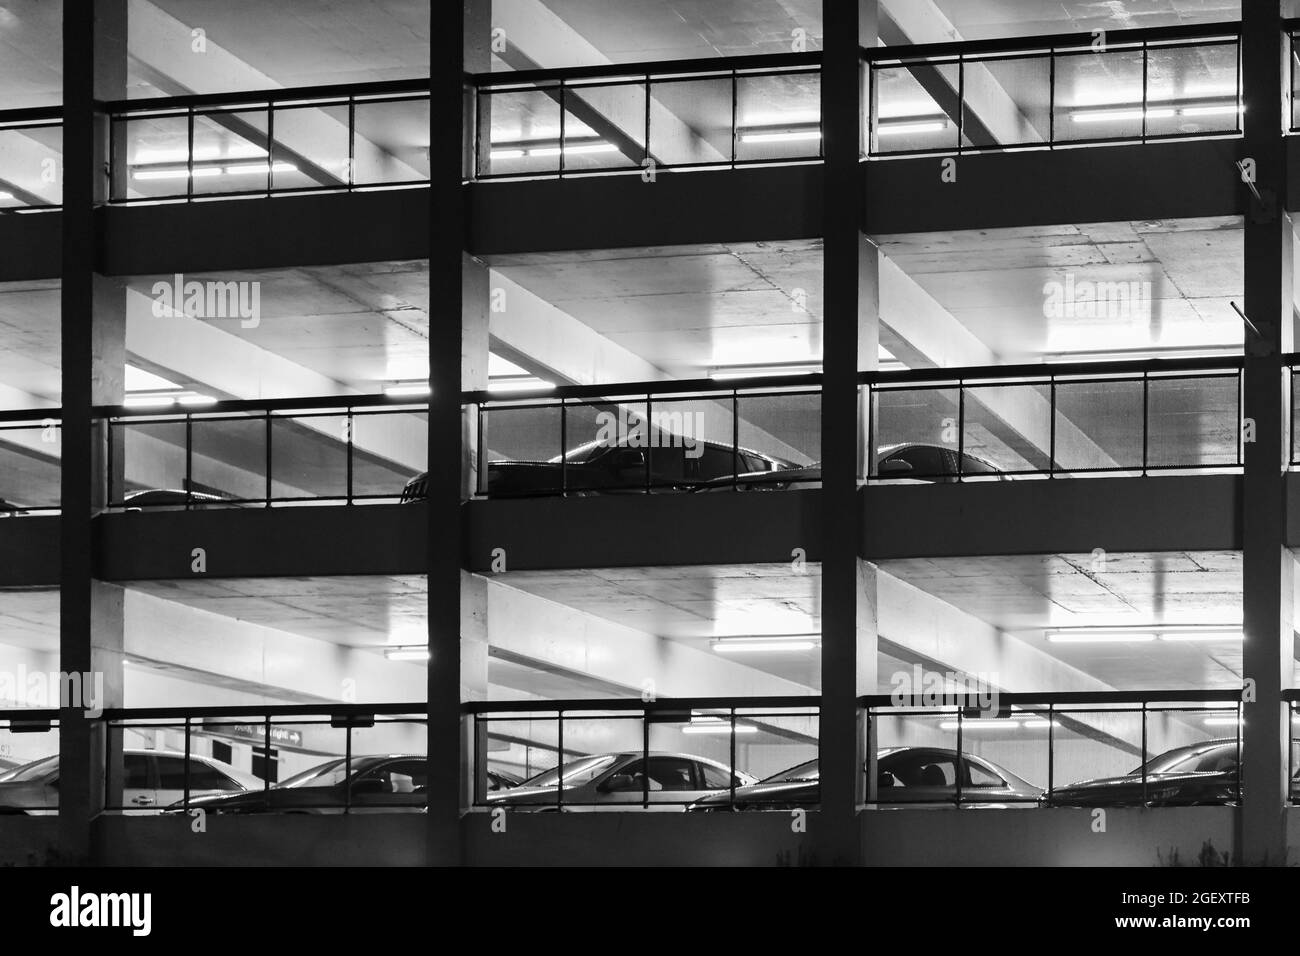 A multi levels parking lot building at night. Black and white street view. Stock Photo